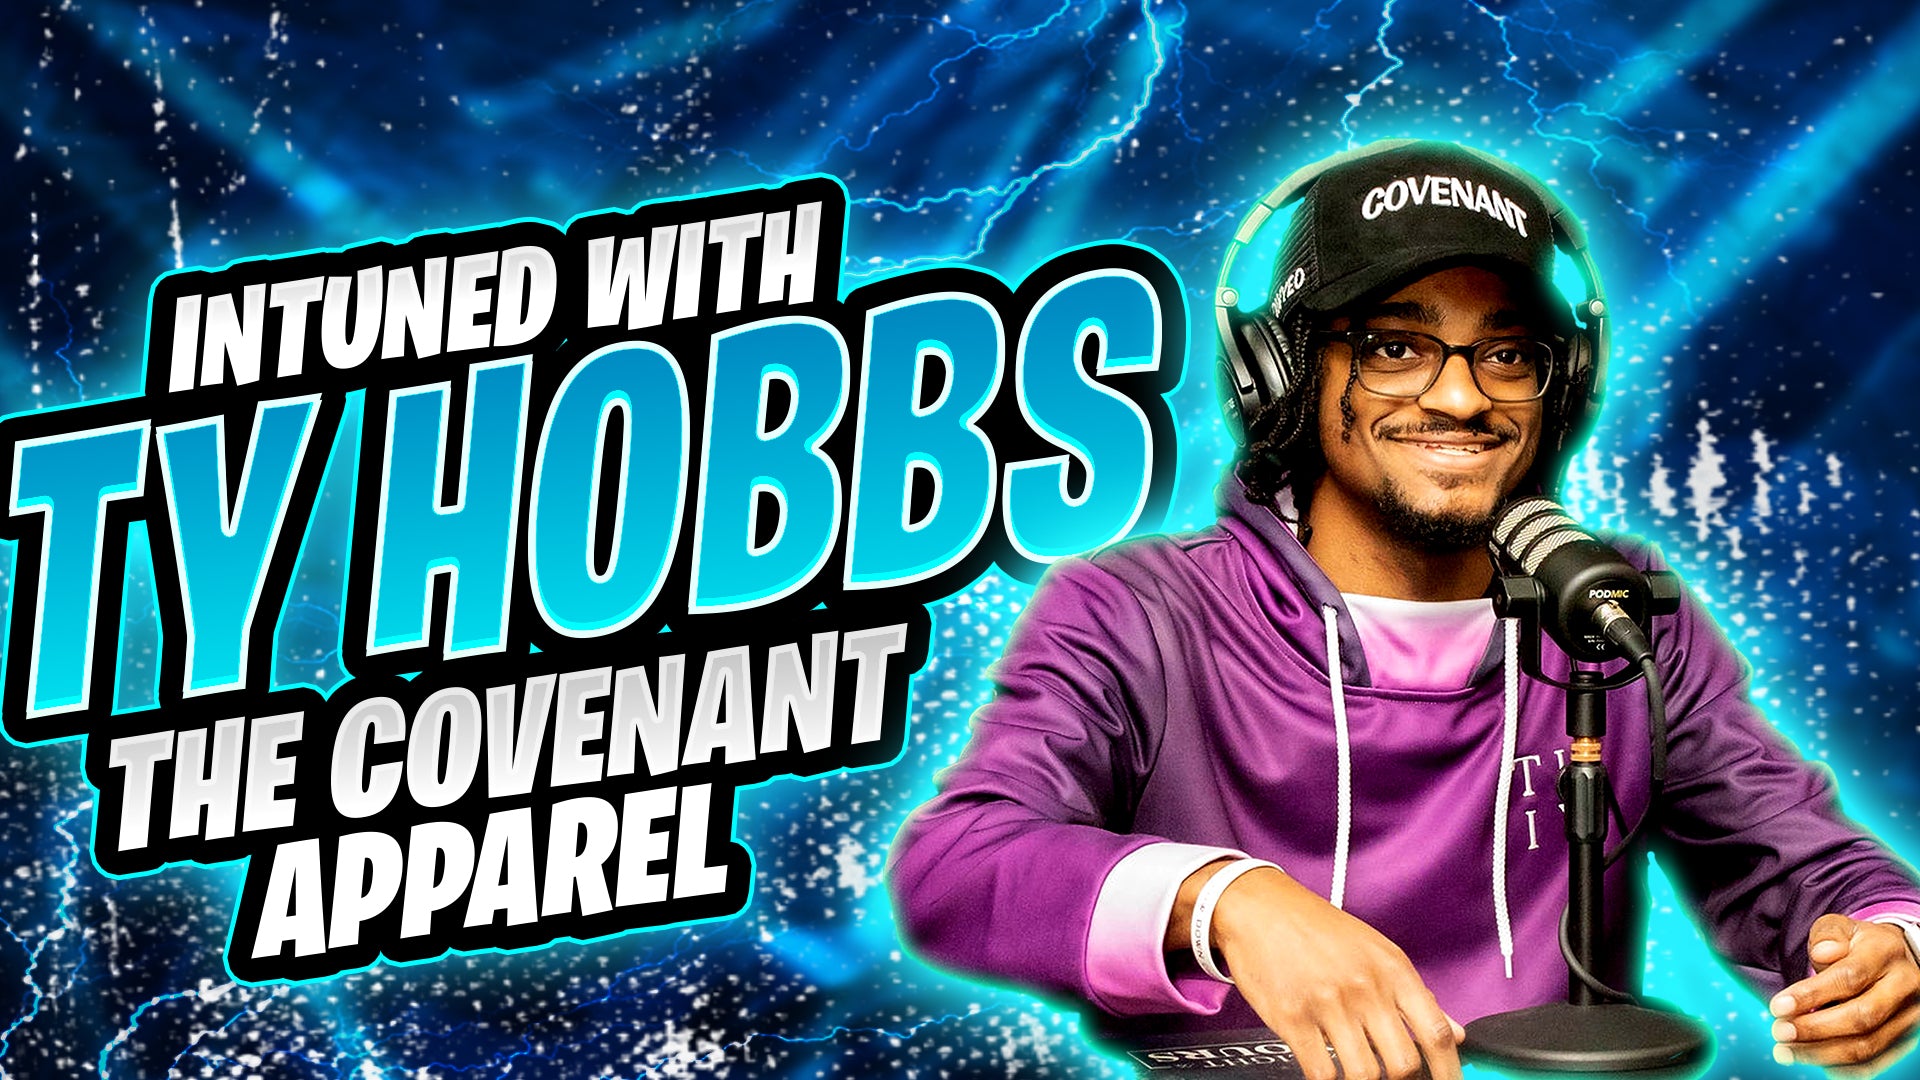 Intuned Interview with The Covenant Apparel